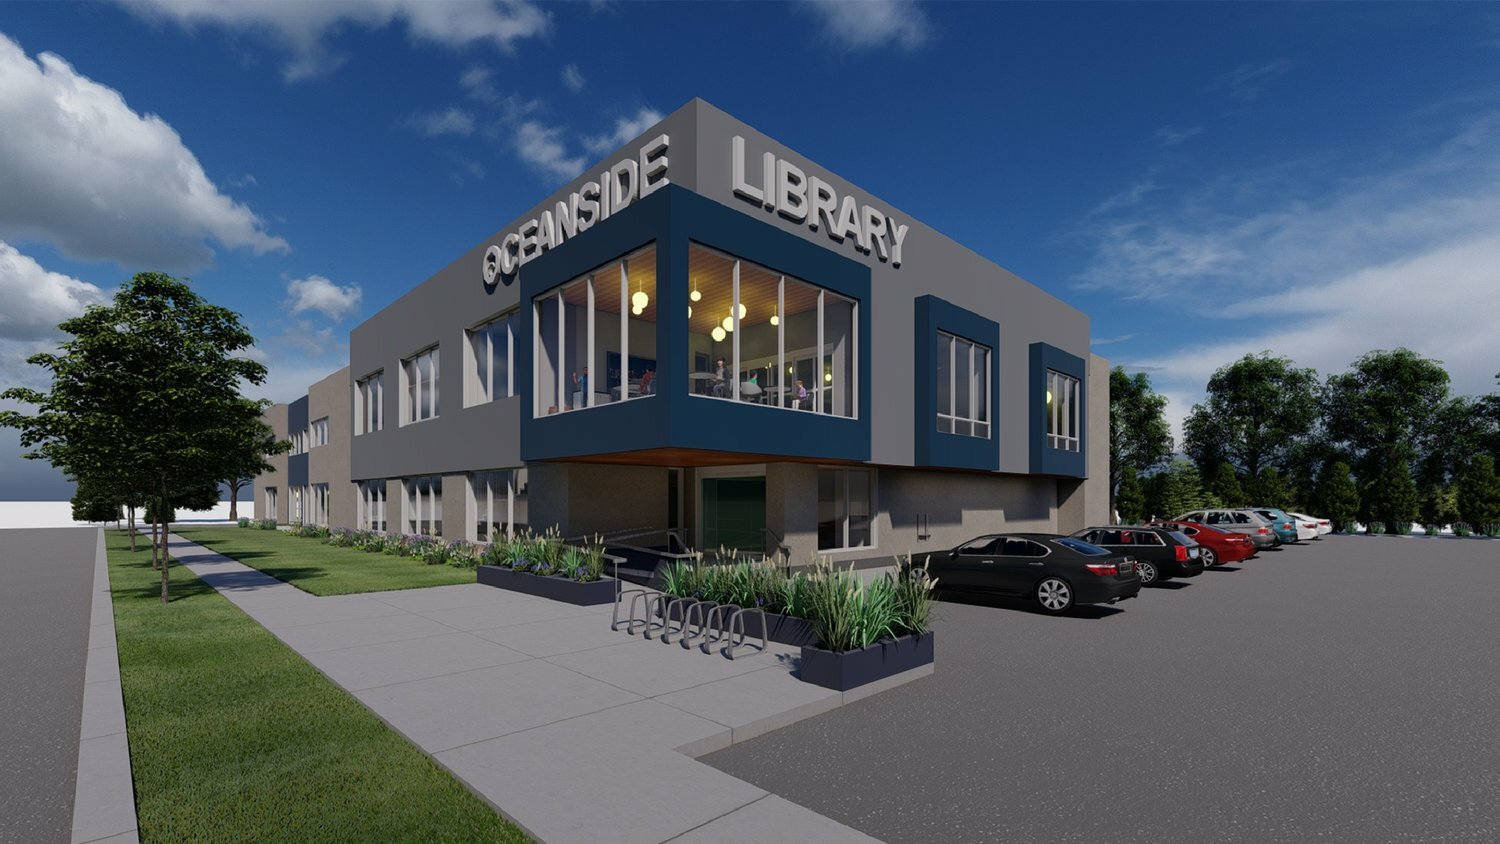 The Oceanside library plans to unveil new renovations next June. Renderings show the modern look the facility will have when work is completed. Library officials hope libraries across Long Island will benefit from more state funding by then.